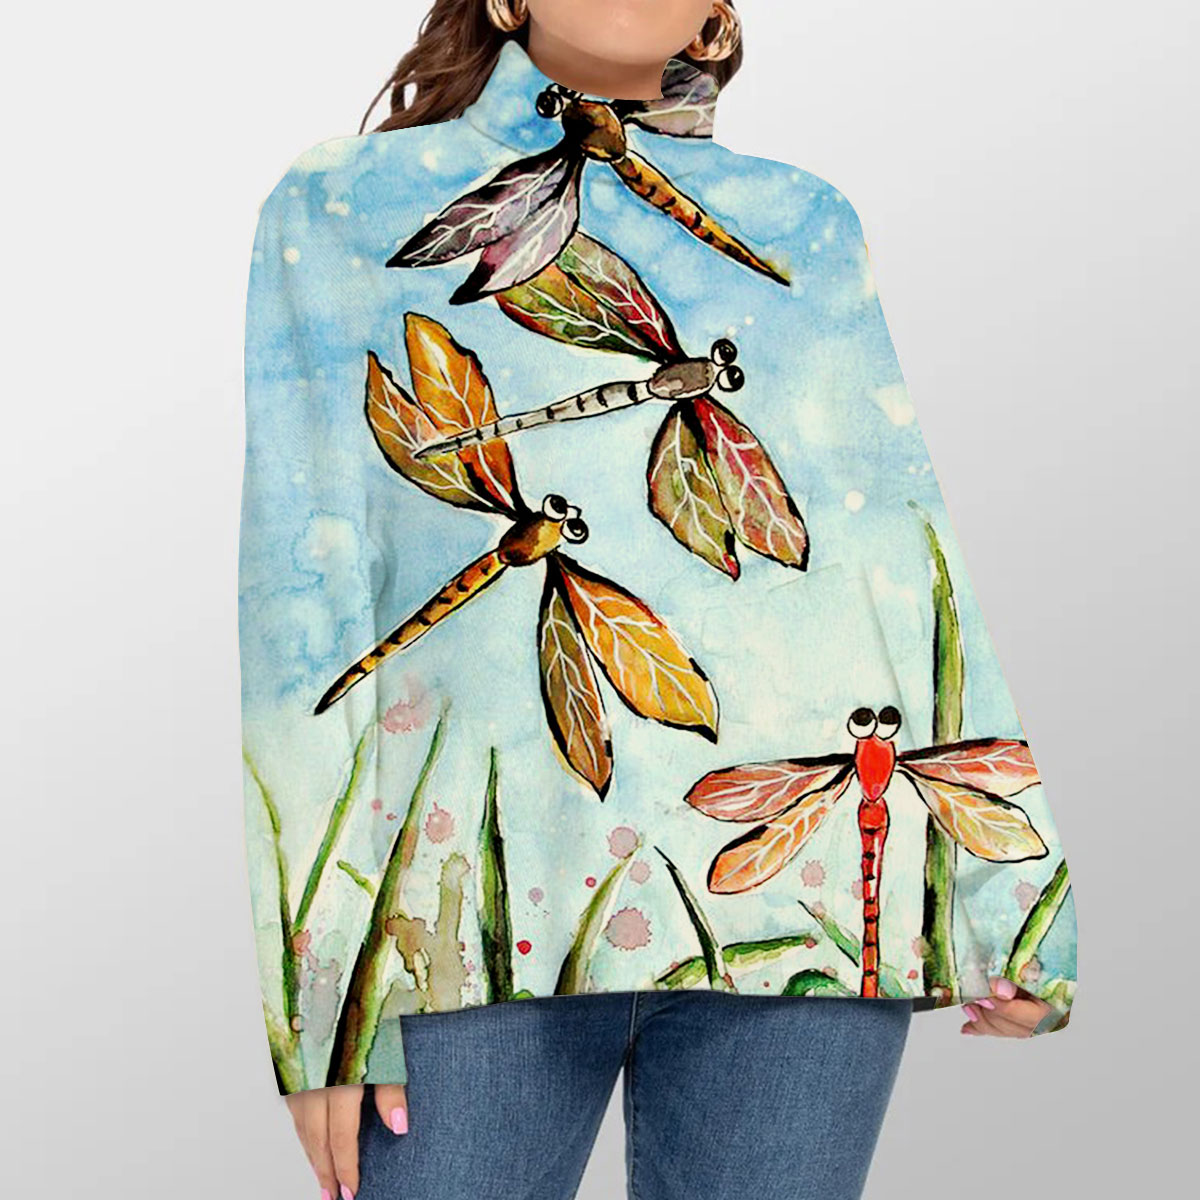 Water Color Dragonfly Turtleneck Sweater